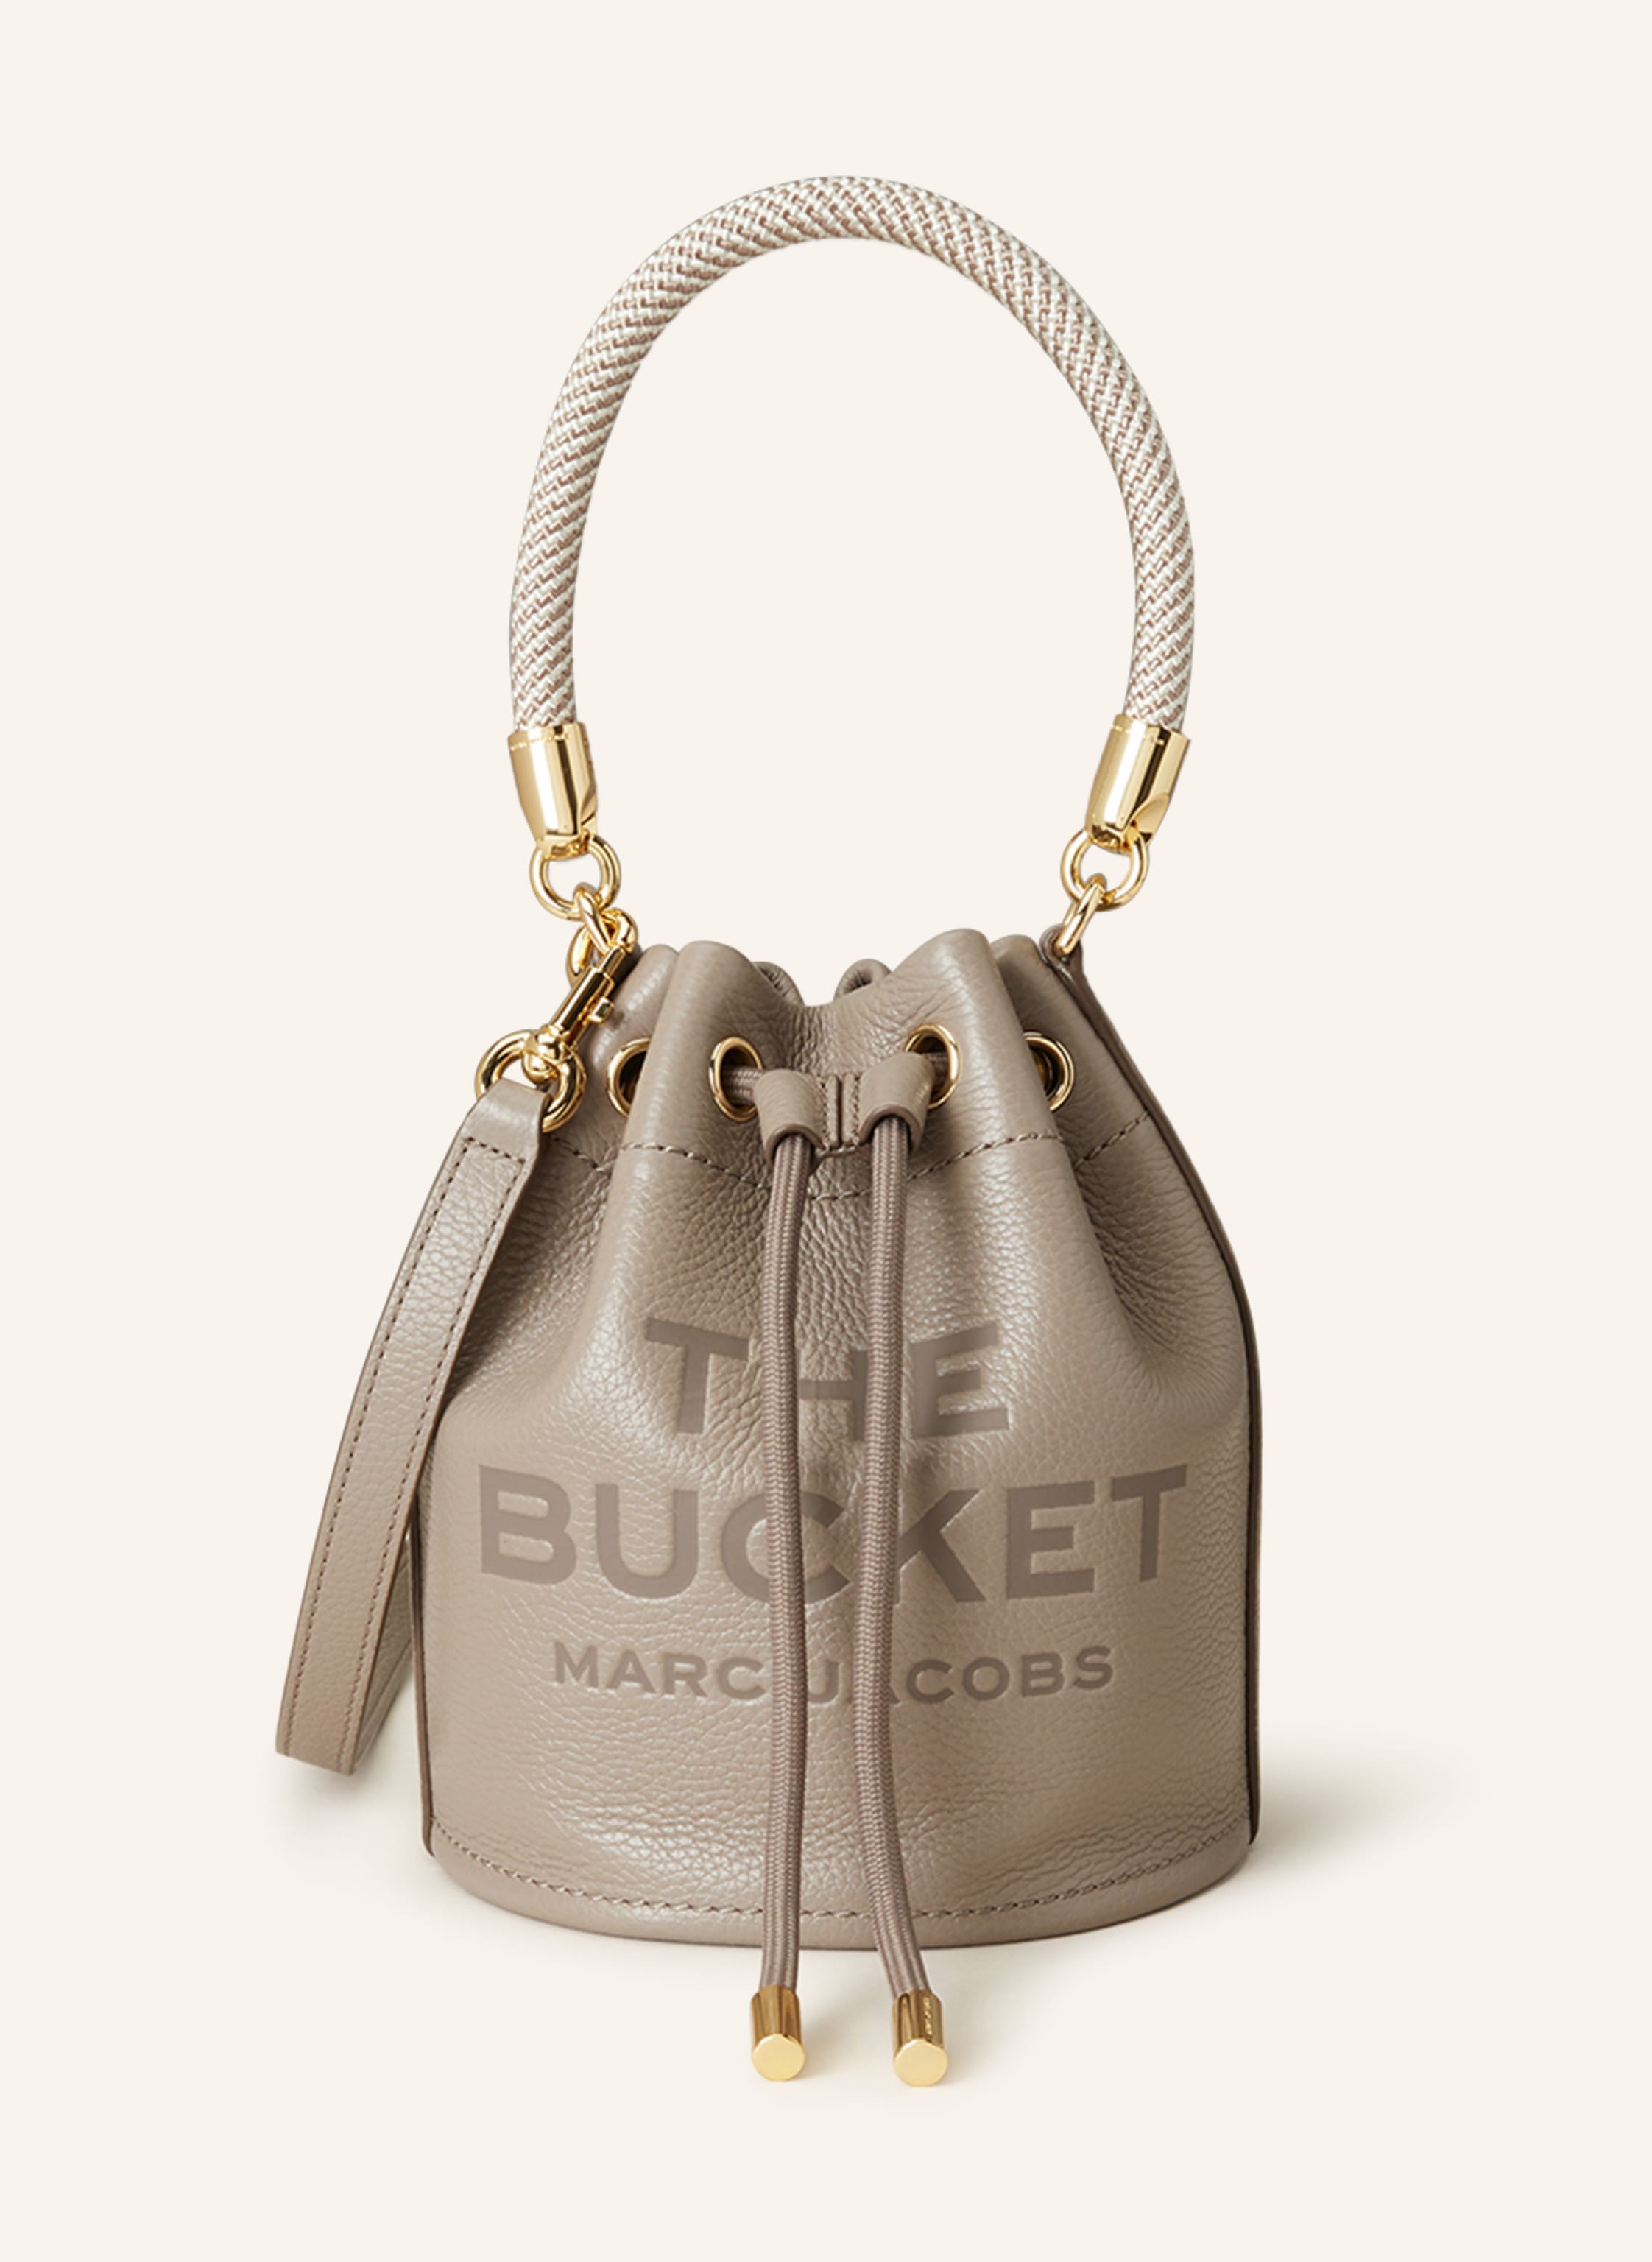 MARC JACOBS Pouch bag THE BUCKET in taupe